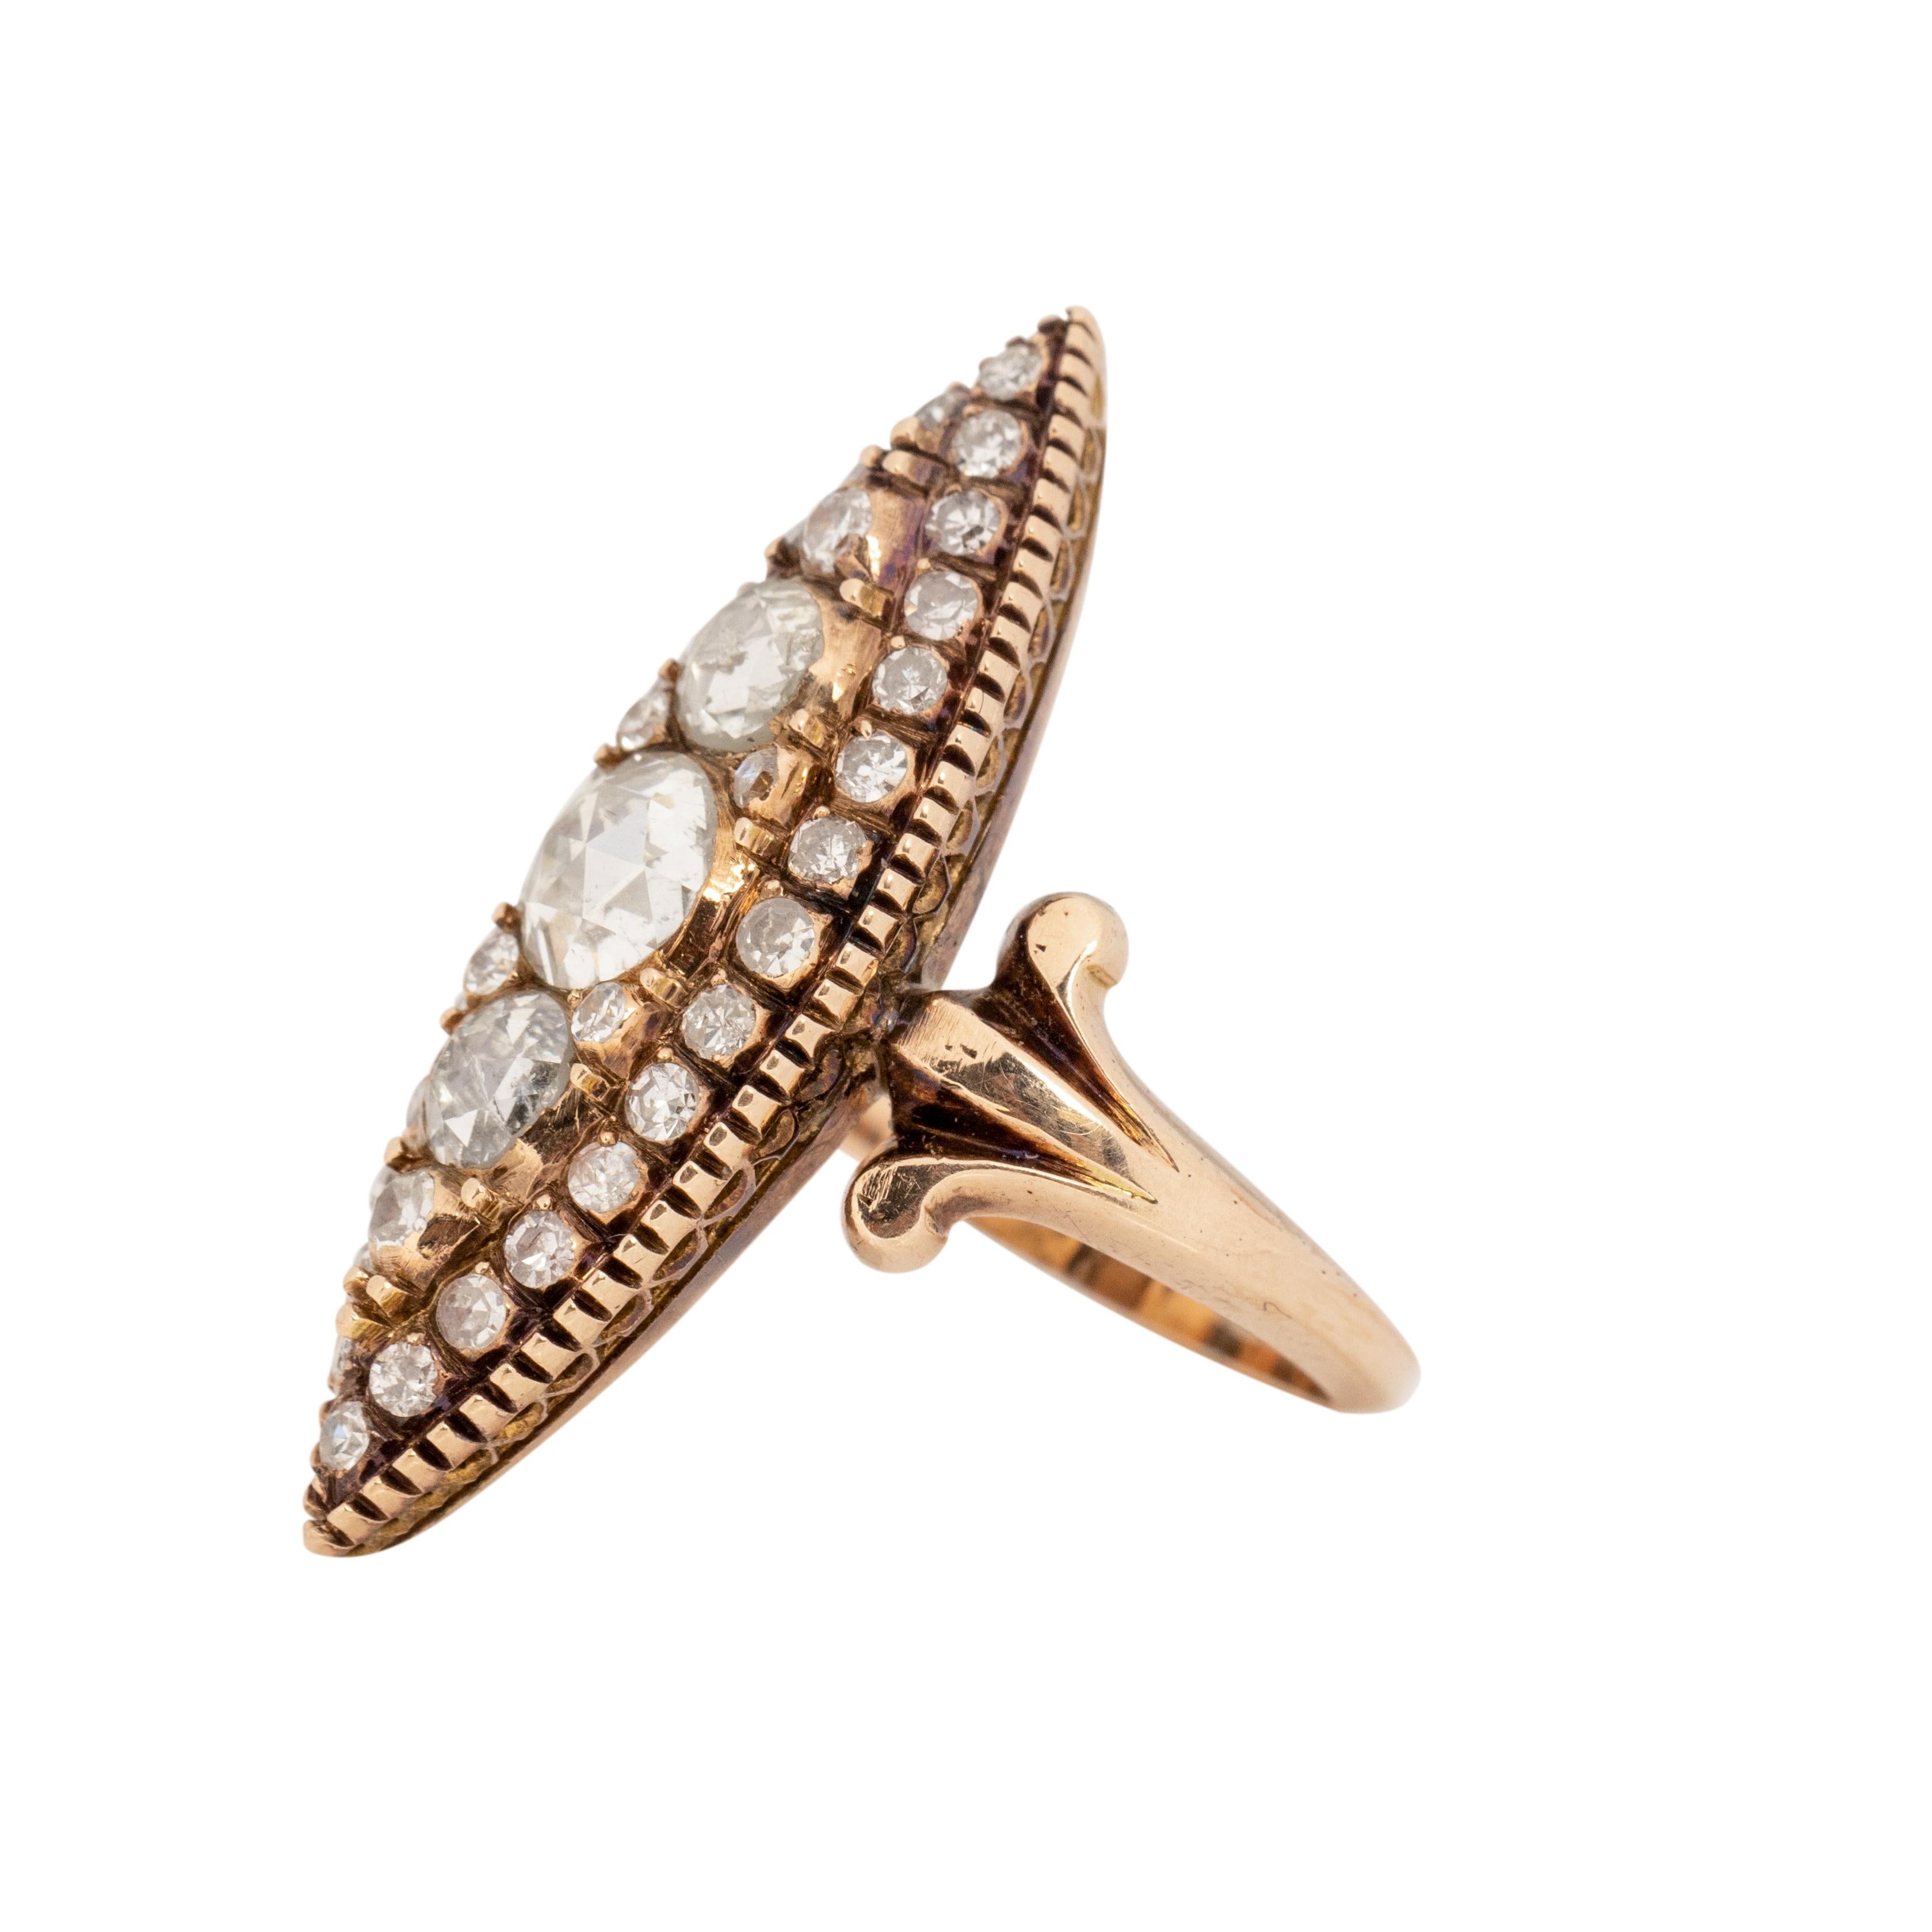 This piece has a bold beautiful look that will have all the heads turning. Crafted in 14K Yellow gold, with beautiful rosy undertones the simple shanks hold a breathtaking navette shape accompanied by a variety rose cut diamonds. This shape is great